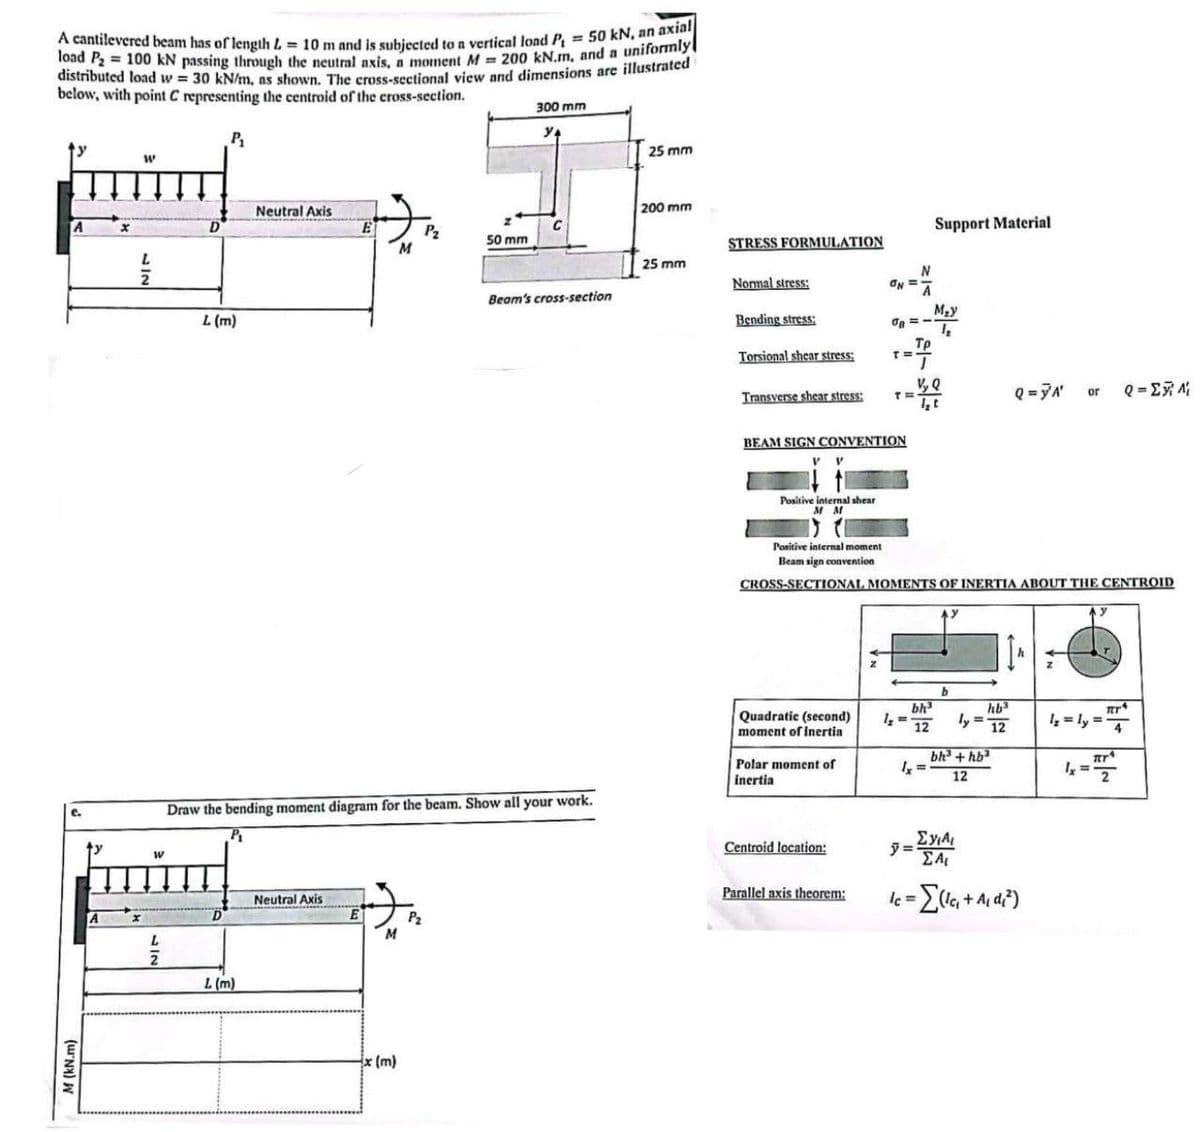 M (kN.m)
e.
A cantilevered beam has of length L = 10 m and is subjected to a vertical load P₁ = 50 kN, an axial
load P₂ = 100 kN passing through the neutral axis, a moment M = 200 kN.m, and a uniformly
distributed load w = 30 kN/m, as shown. The cross-sectional view and dimensions are illustrated
below, with point C representing the centroid of the cross-section.
300 mm
W
A
x
D
W
2
L (m)
P₁
ولا
25 mm
Neutral Axis
200 mm
P2
Support Material
50 mm
M
STRESS FORMULATION
25 mm
N
Normal stress:
ON=
Beam's cross-section
M₂y
Bending stress:
Τρ
Torsional shear stress:
T=
V, Q
Transverse shear stress:
T = It
Q=YA'
or
Q=
Draw the bending moment diagram for the beam. Show all your work.
P₁
A
L
42
D
L (m)
Neutral Axis
P₂
M
x (m)
BEAM SIGN CONVENTION
V
V
Positive internal shear
M M
Positive internal moment
Beam sign convention
CROSS-SECTIONAL MOMENTS OF INERTIA ABOUT THE CENTROID
y
bh³
Quadratic (second)
1,=
ly =
moment of inertia
12
hb³
12
πρ
1₂ = ly=4
bh3+hb3
Polar moment of
inertia
1x =
12
1x = 177
Σχιλι
Centroid location:
= Al
Parallel axis theorem:
==Σ(1c₁ + A₁ d₁²)